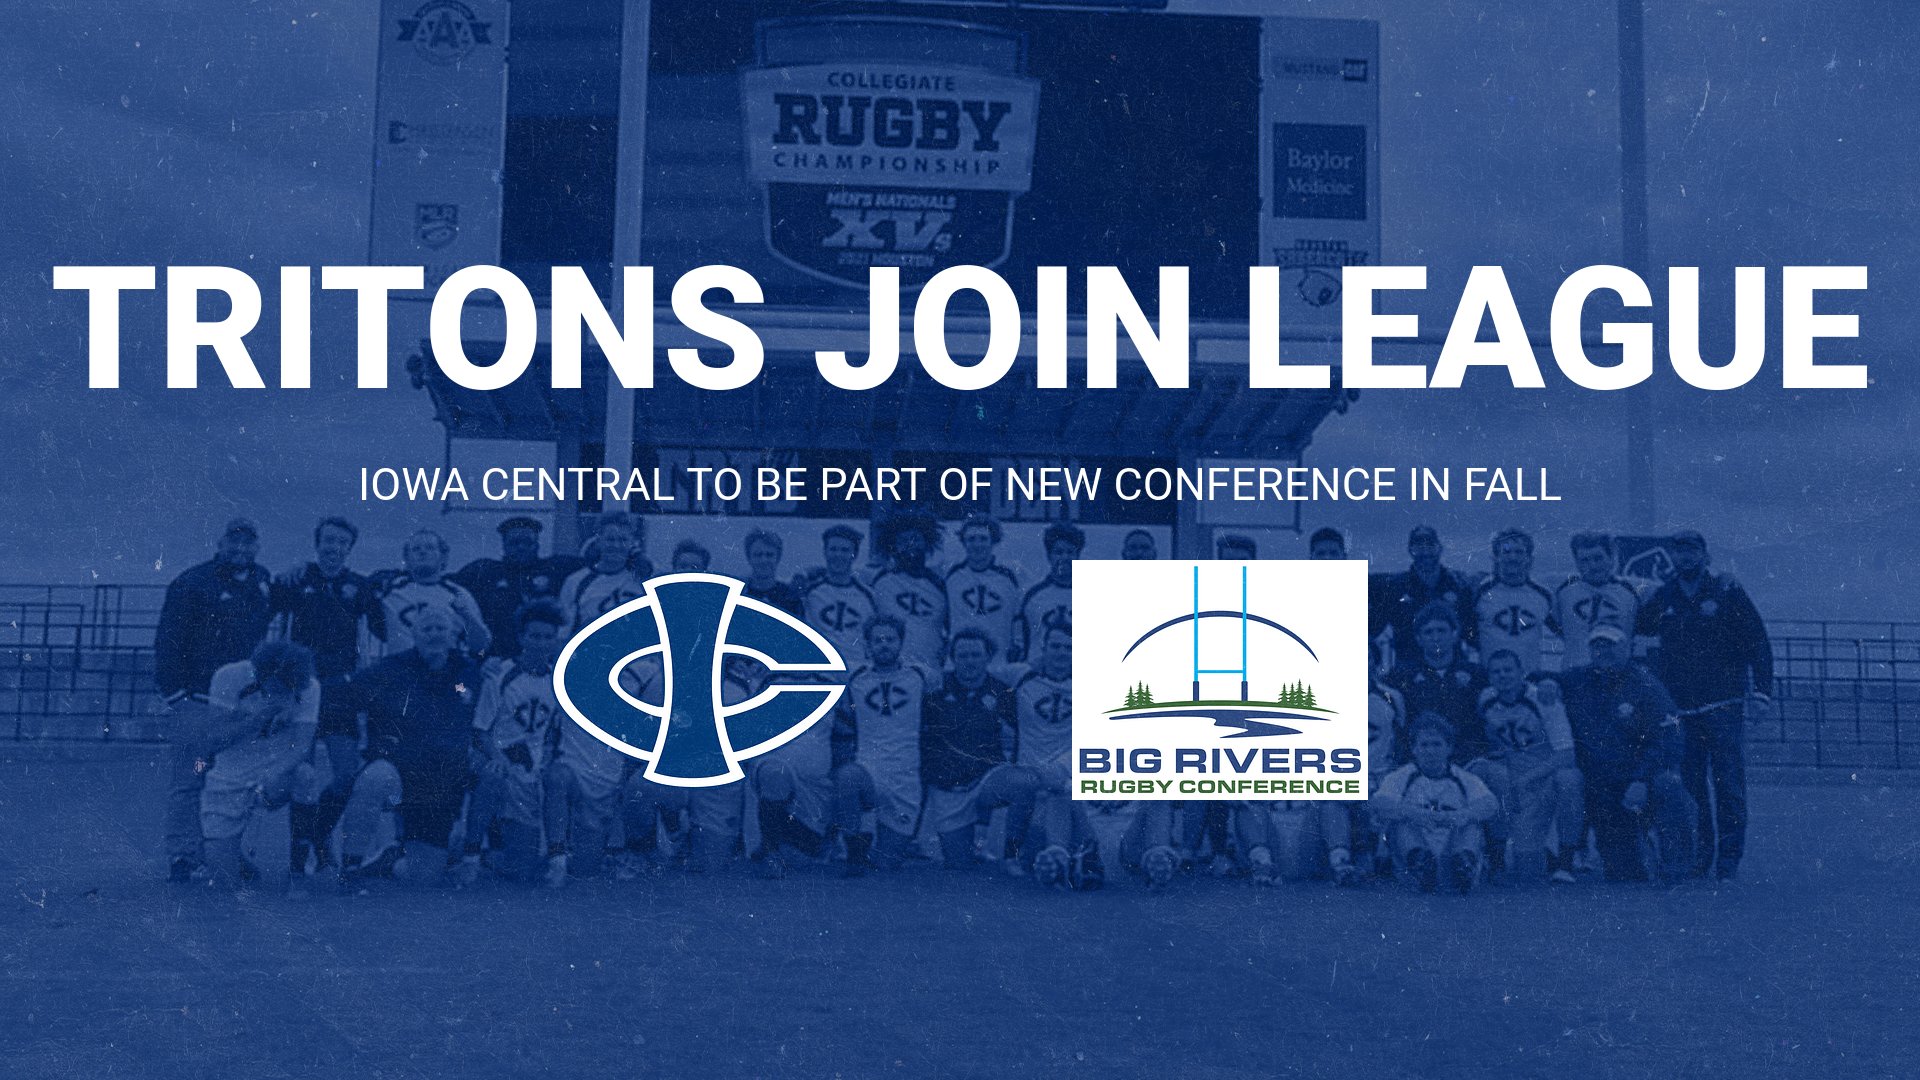 Tritons find a home with Big Rivers Conference